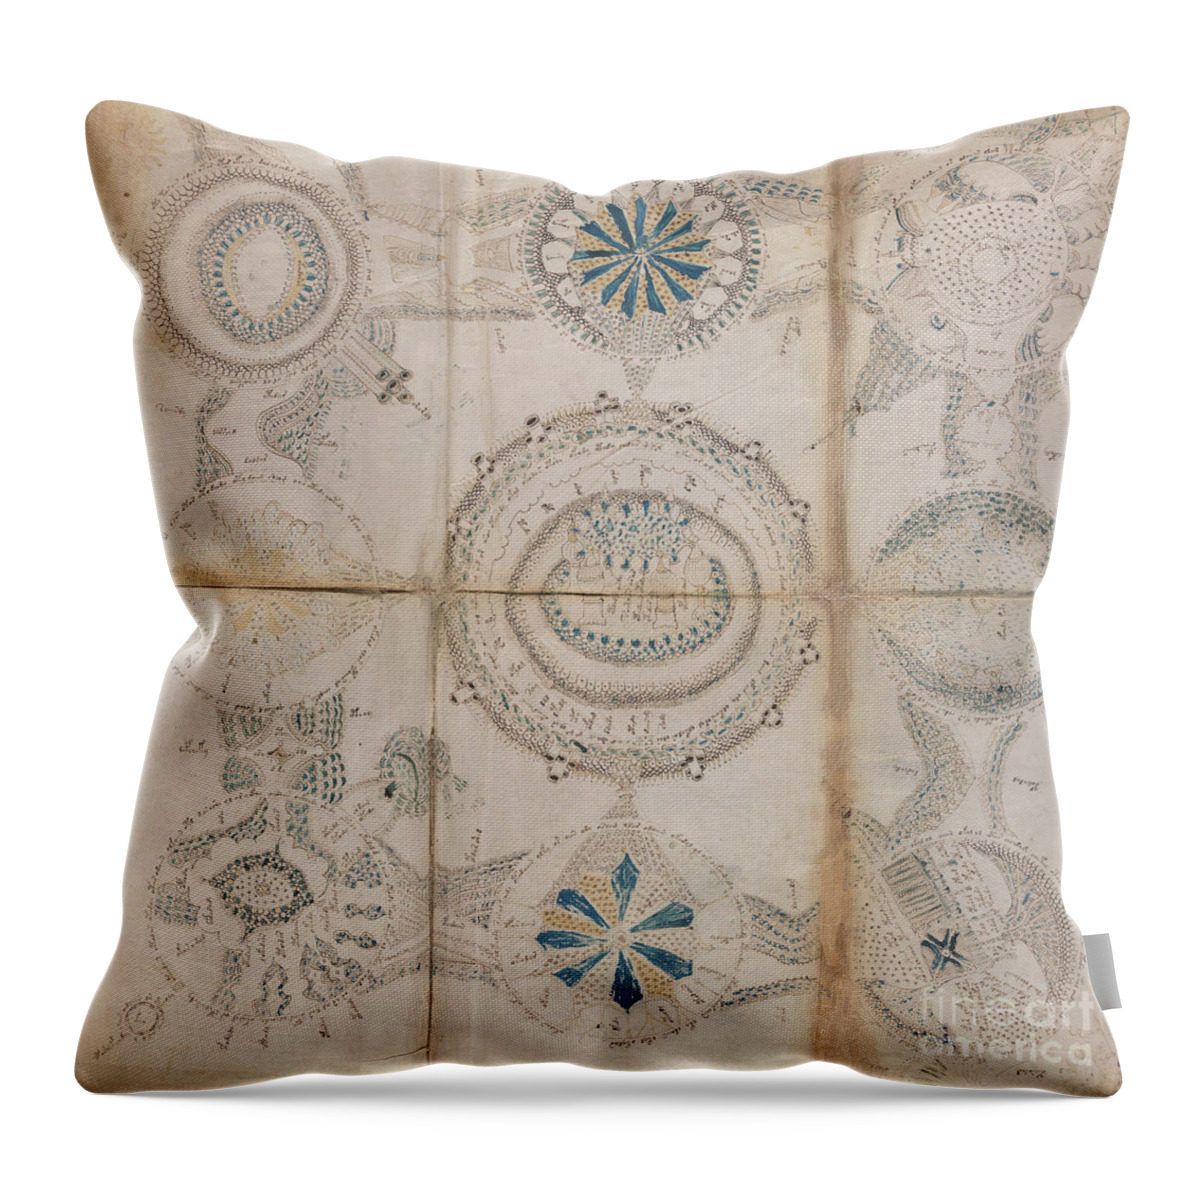 Astronomy Throw Pillow featuring the drawing Voynich Astro 3x3 by Rick Bures